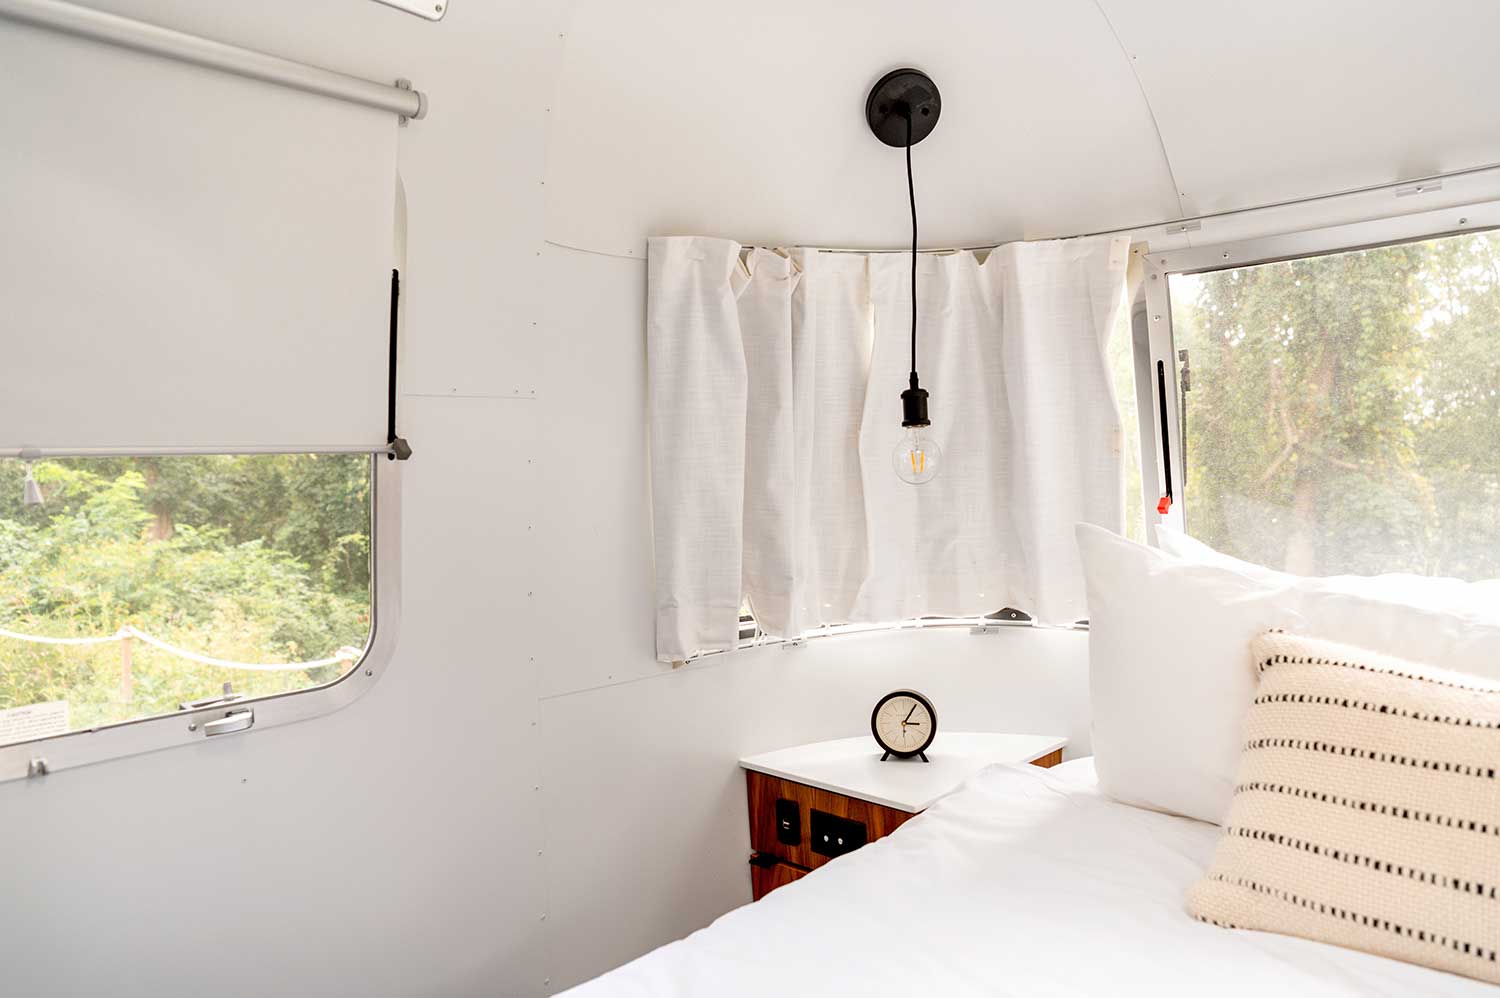 Bedroom of an Airstream